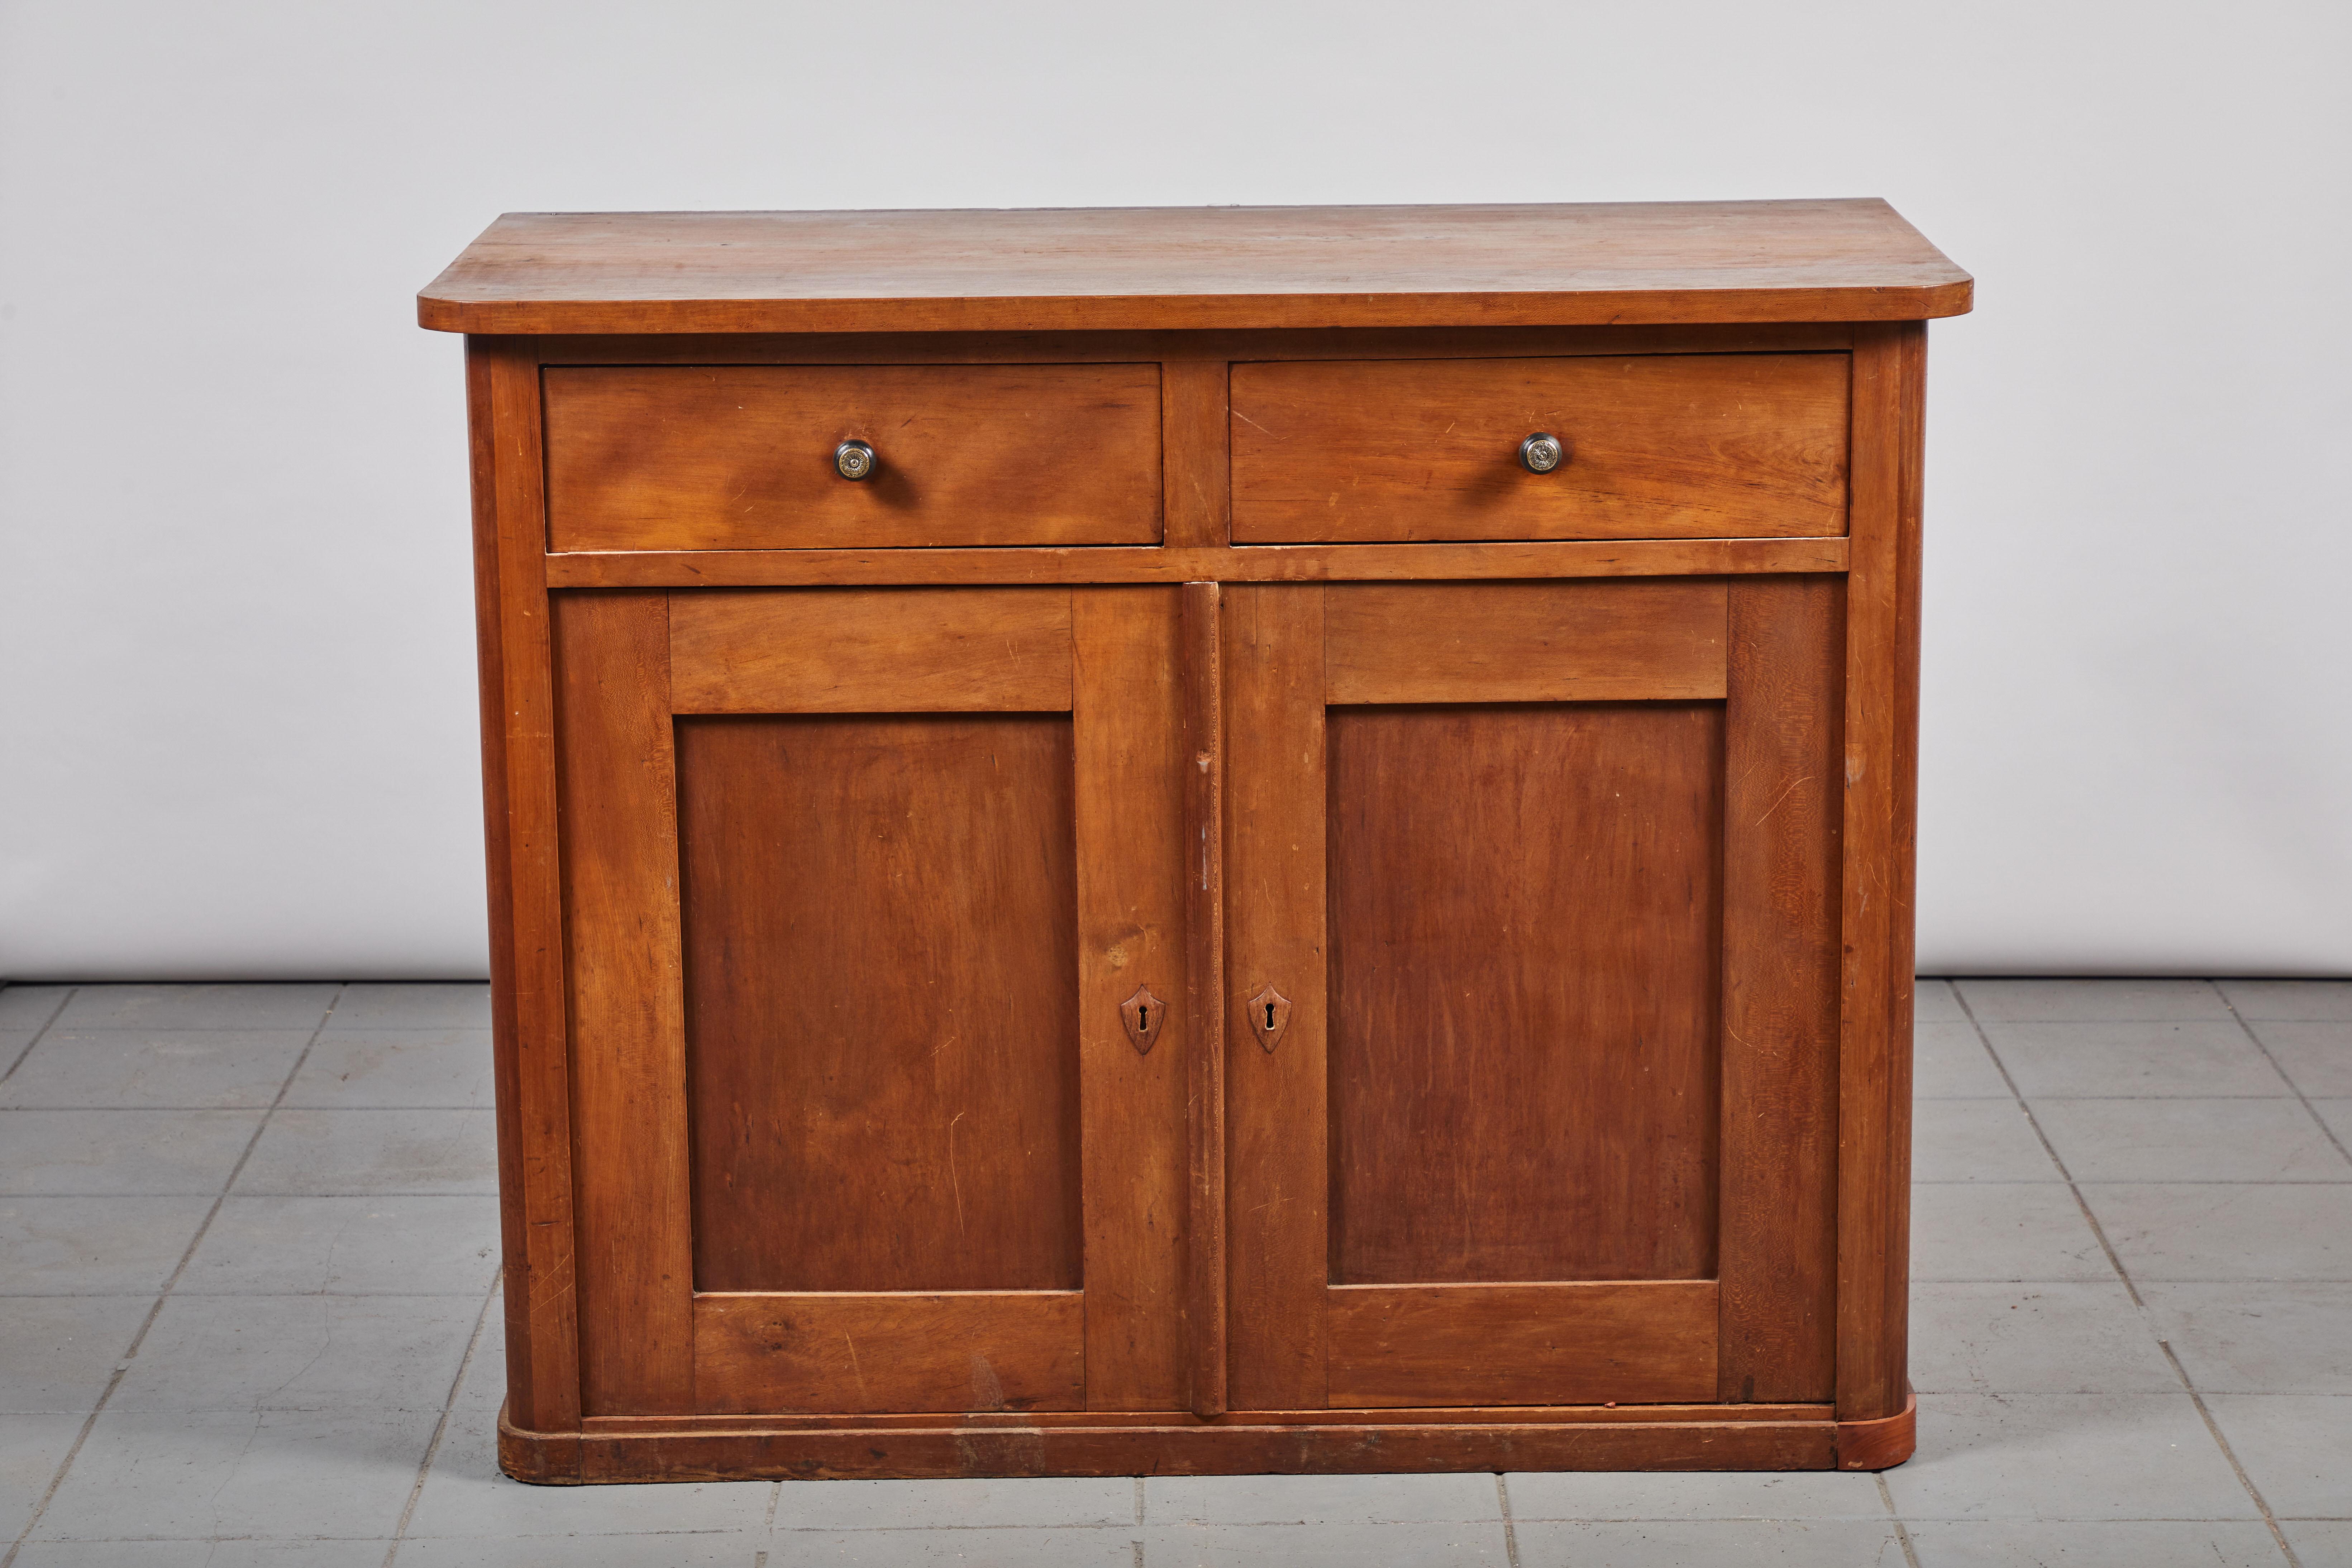 Early American cherry two-door two-drawer cabinet.